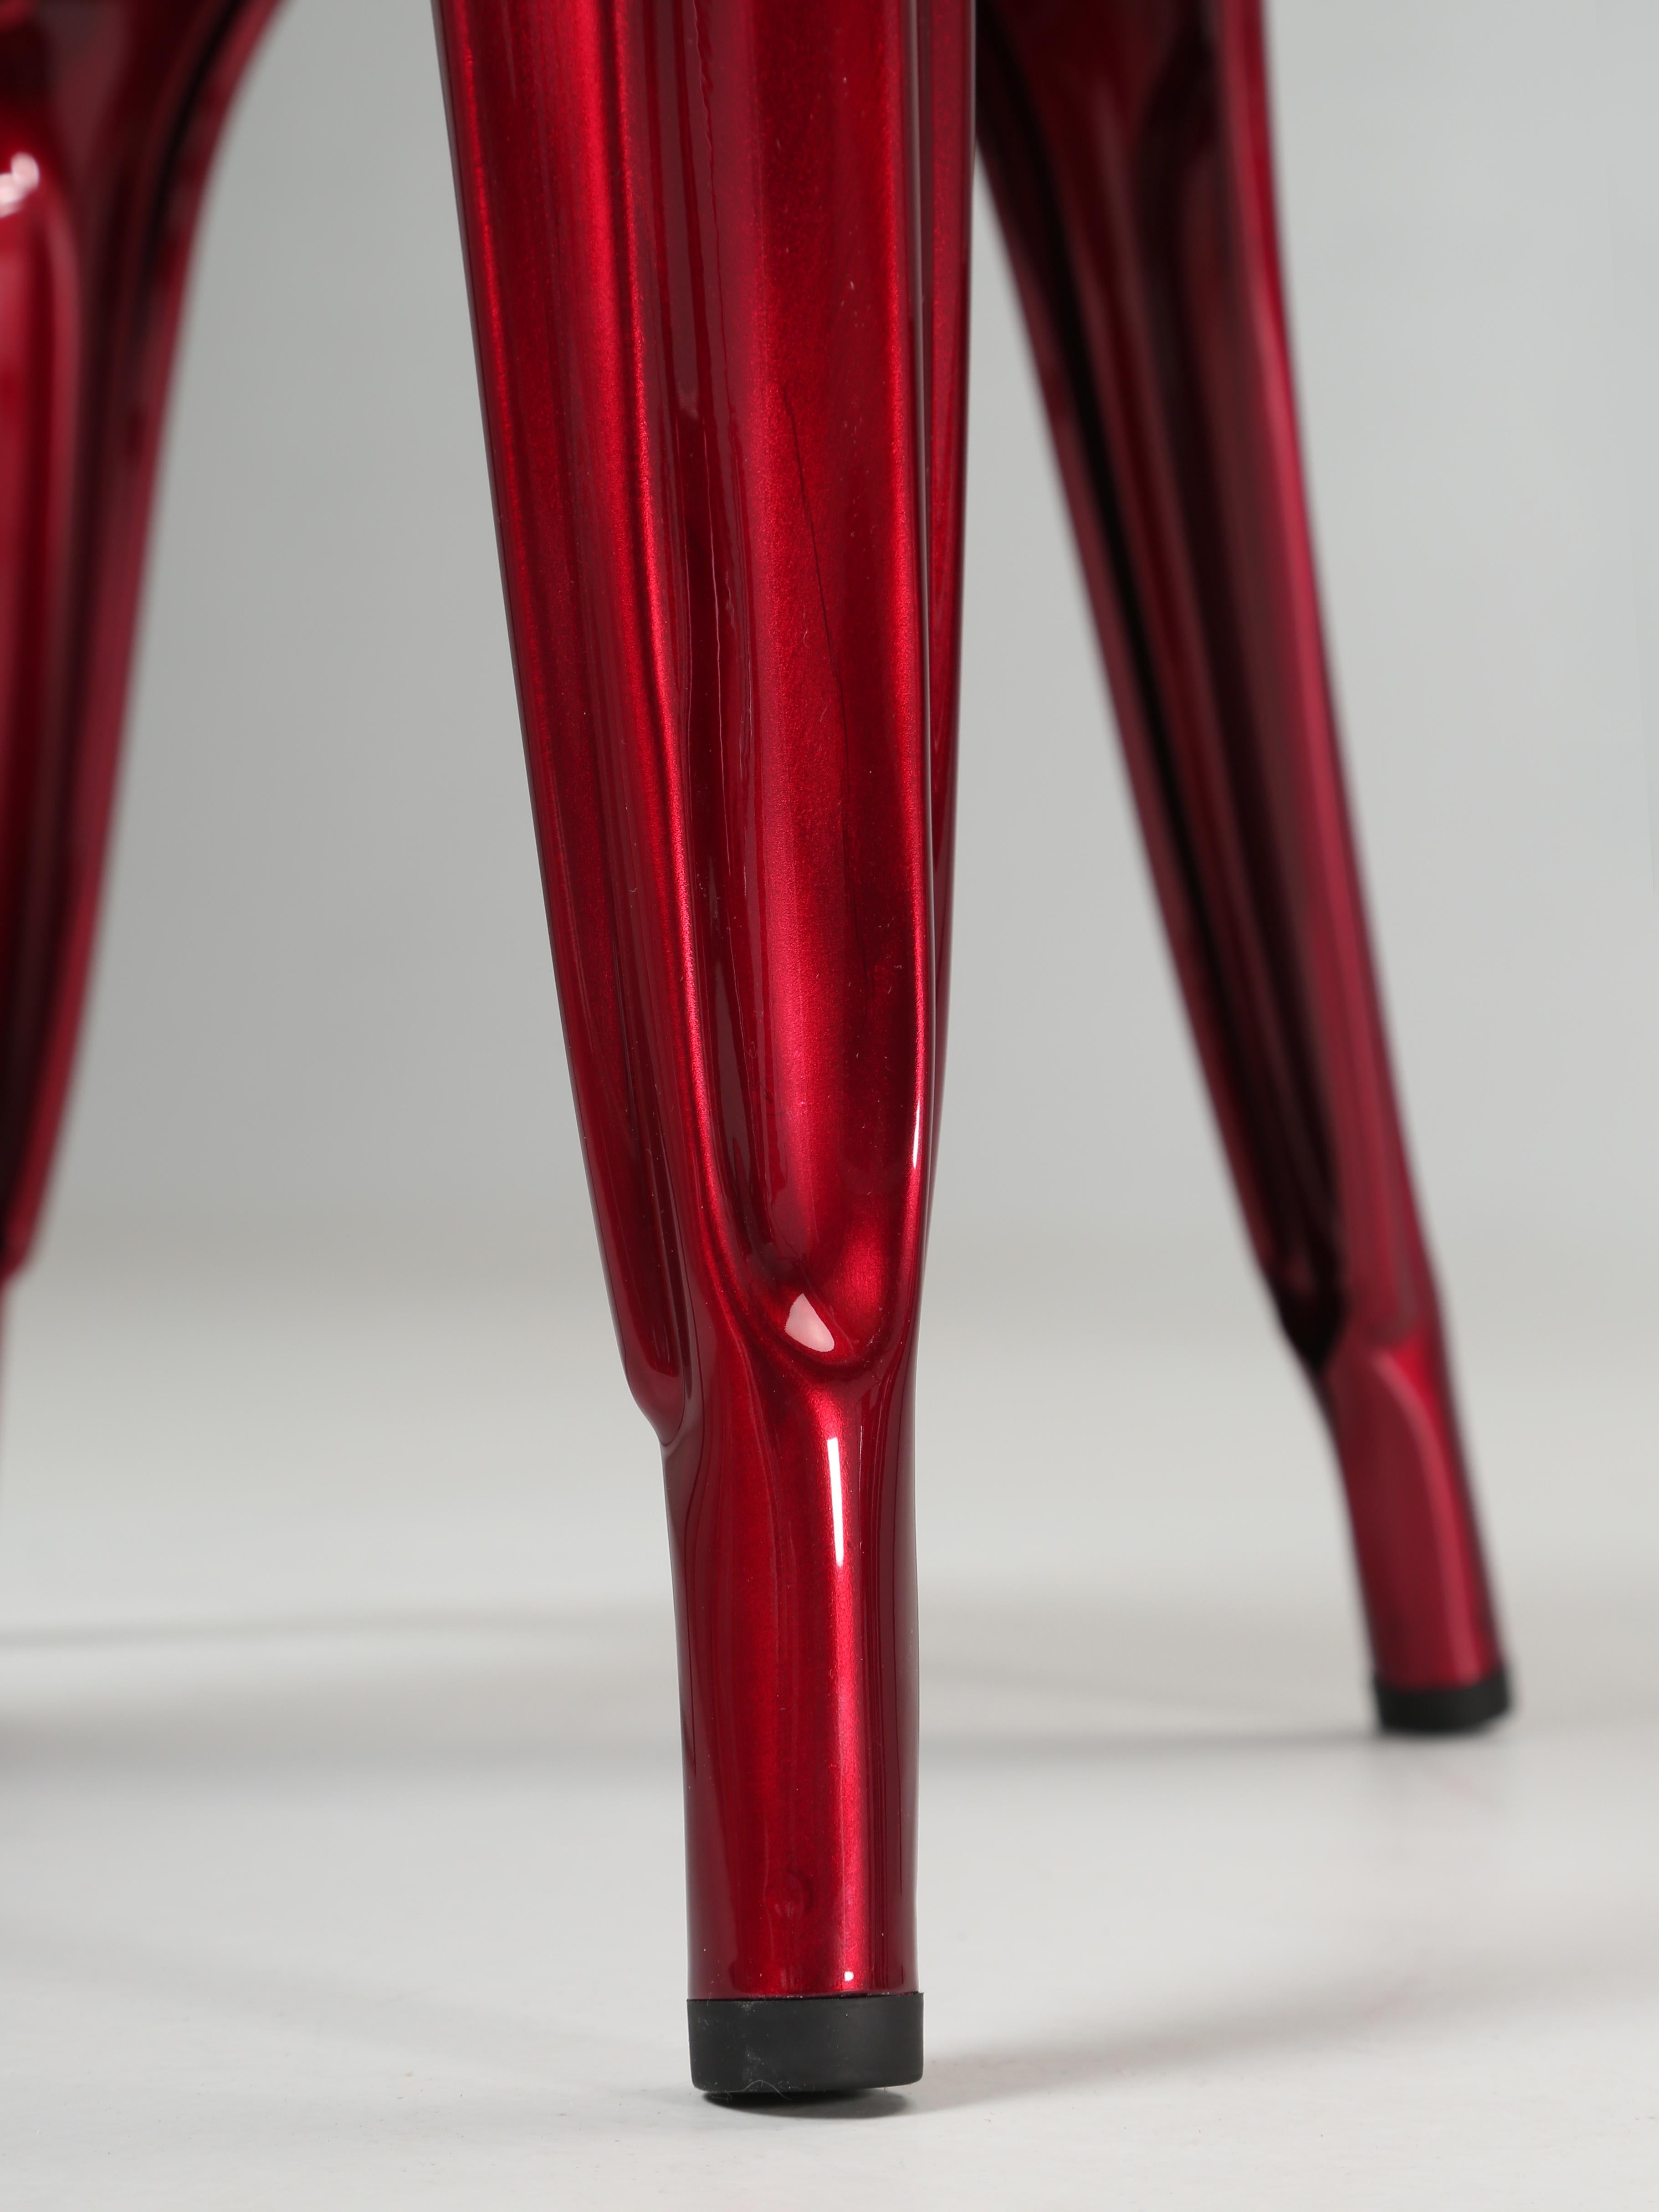 Tolix Set of (4) Steel Stacking Chairs in a Brilliant Candy Apple Red Metallic 6